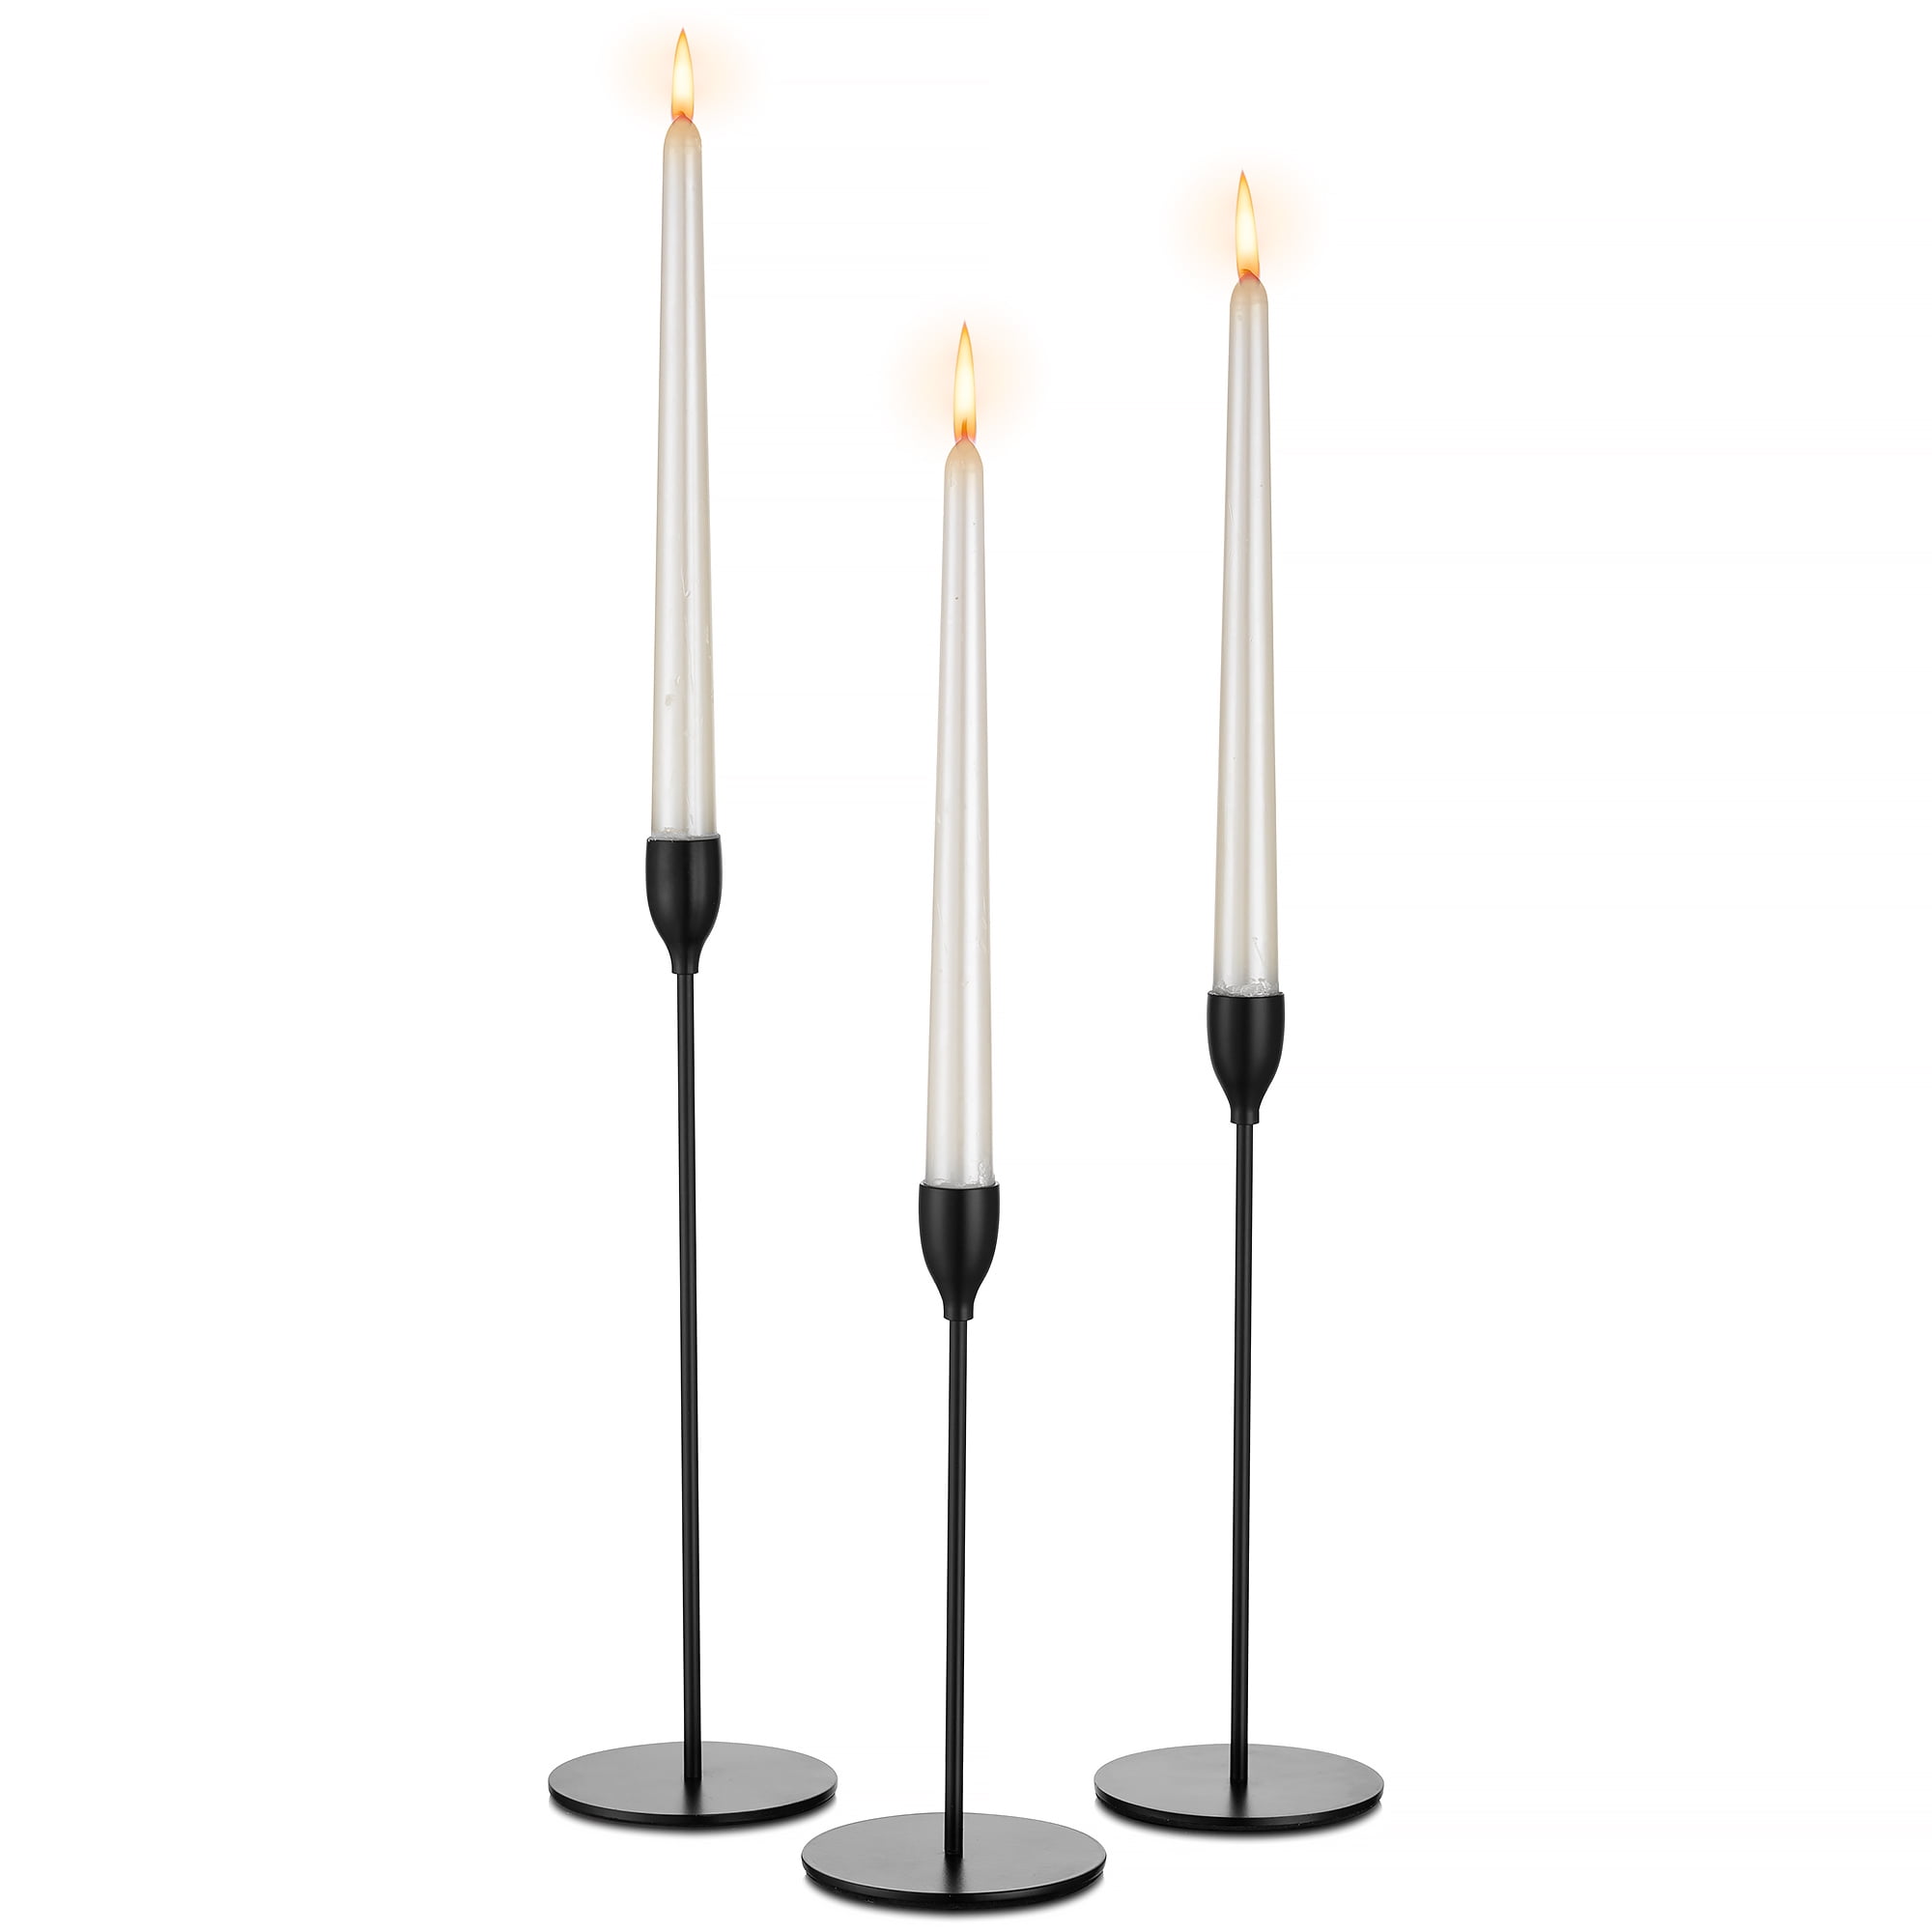 Sziqiqi Black Candle Holder Tall Candlesticks for Taper Candles Modern ...